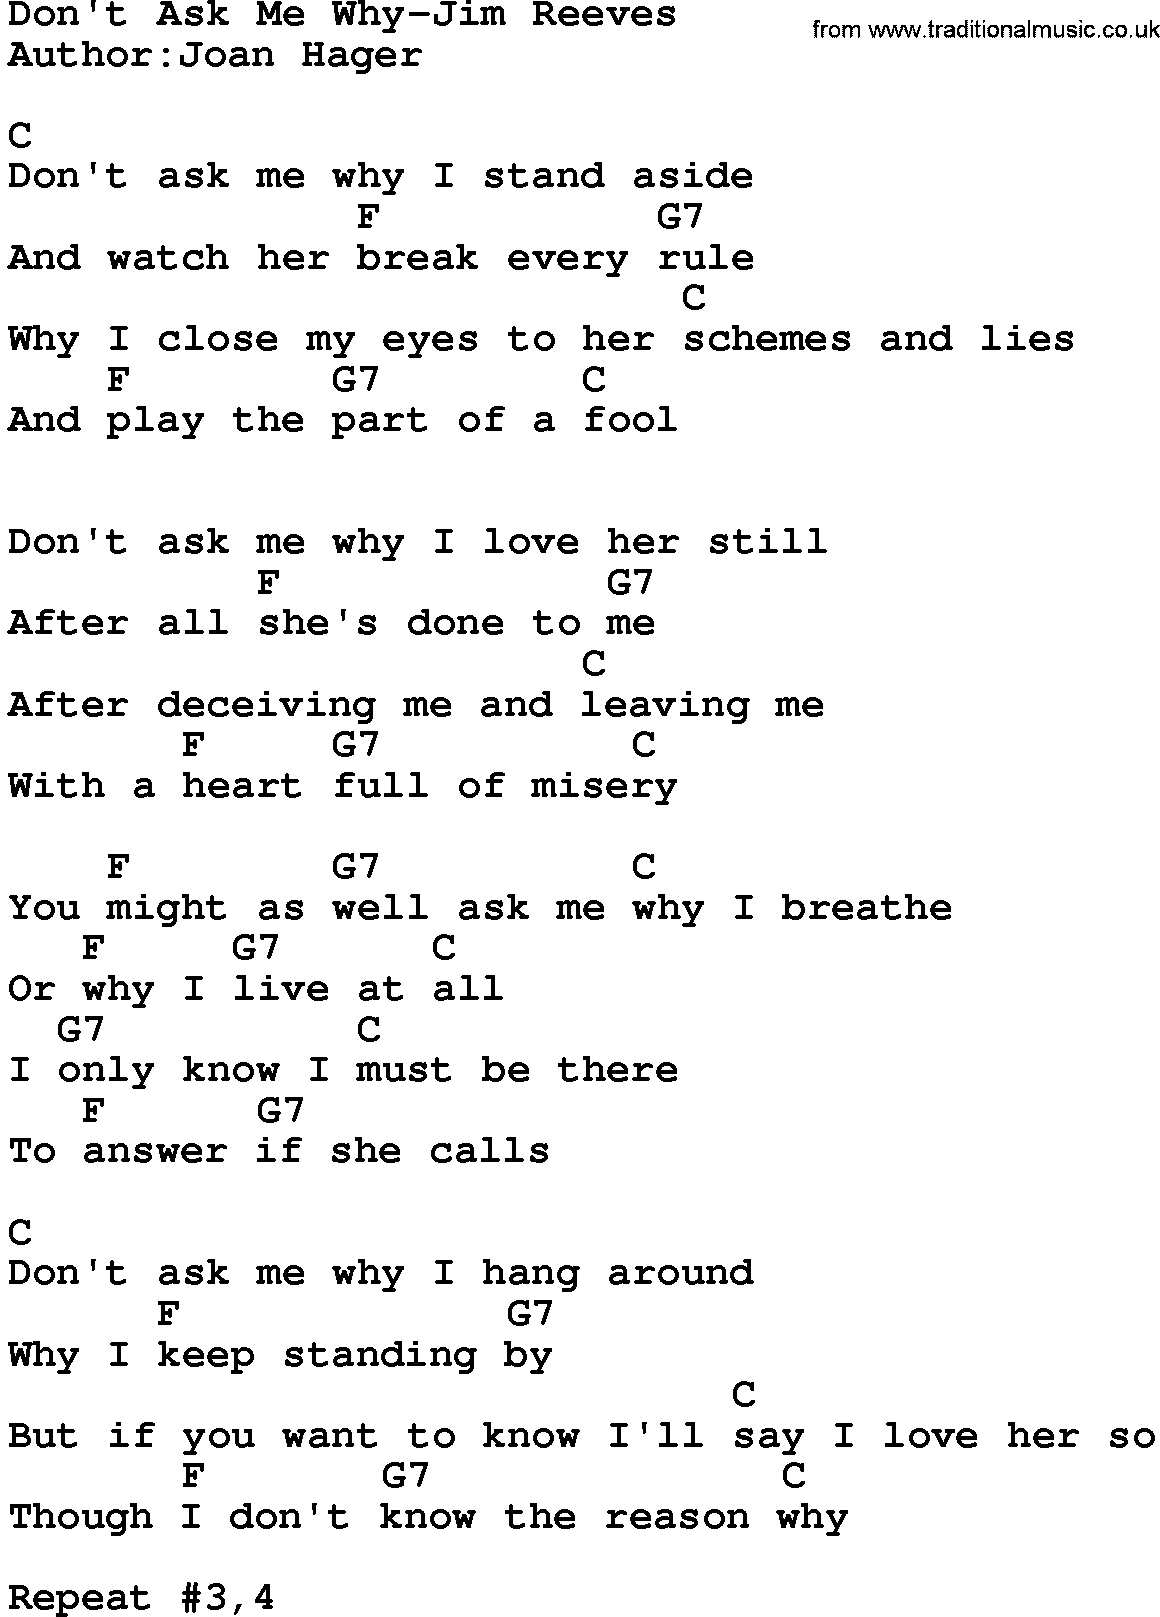 Country music song: Don't Ask Me Why-Jim Reeves lyrics and chords